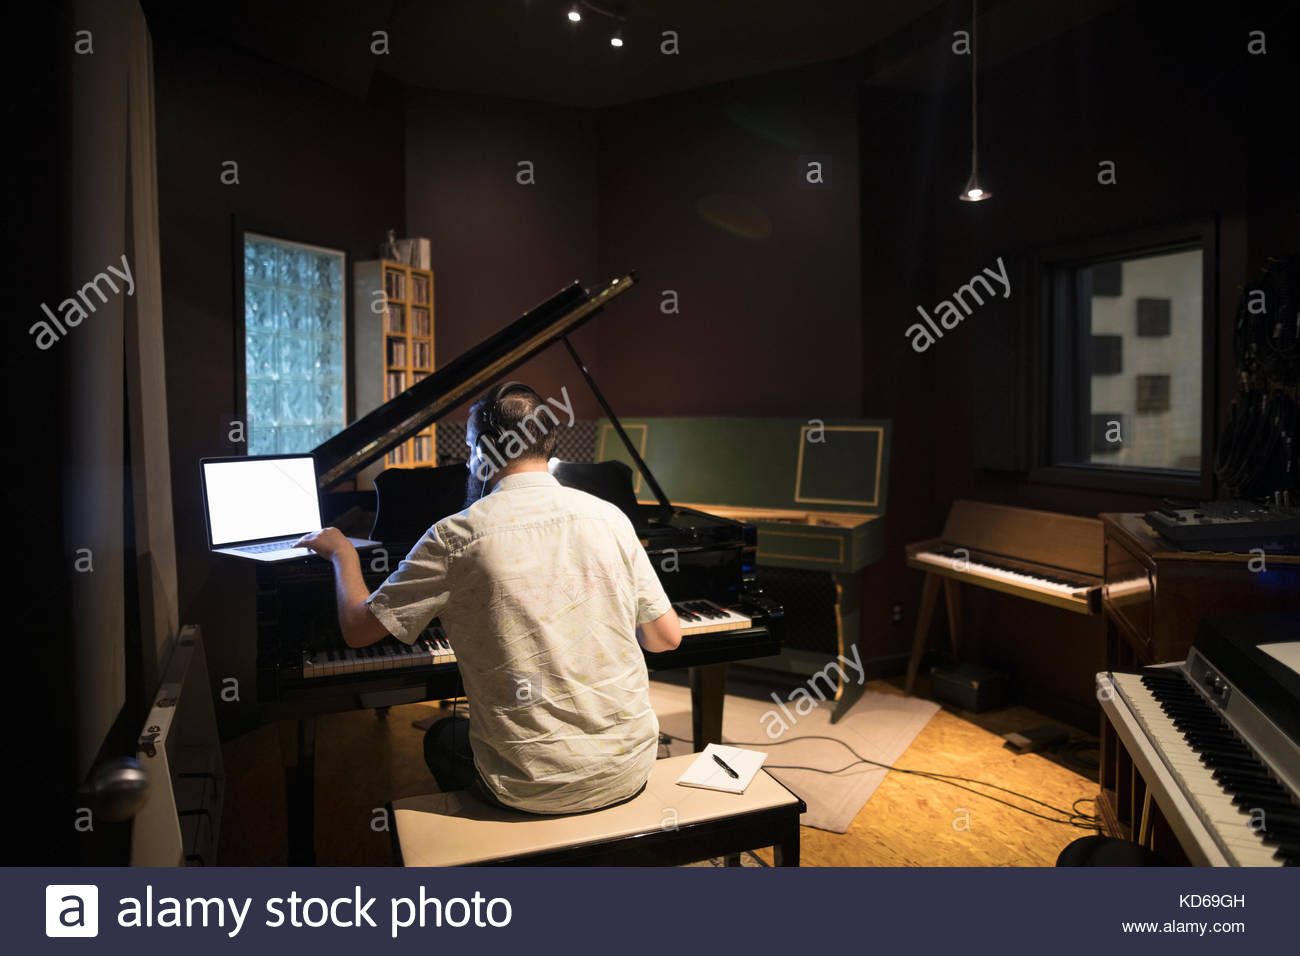 Male pianist playing grand piano, writing music at laptop in recording studio Stock Photo